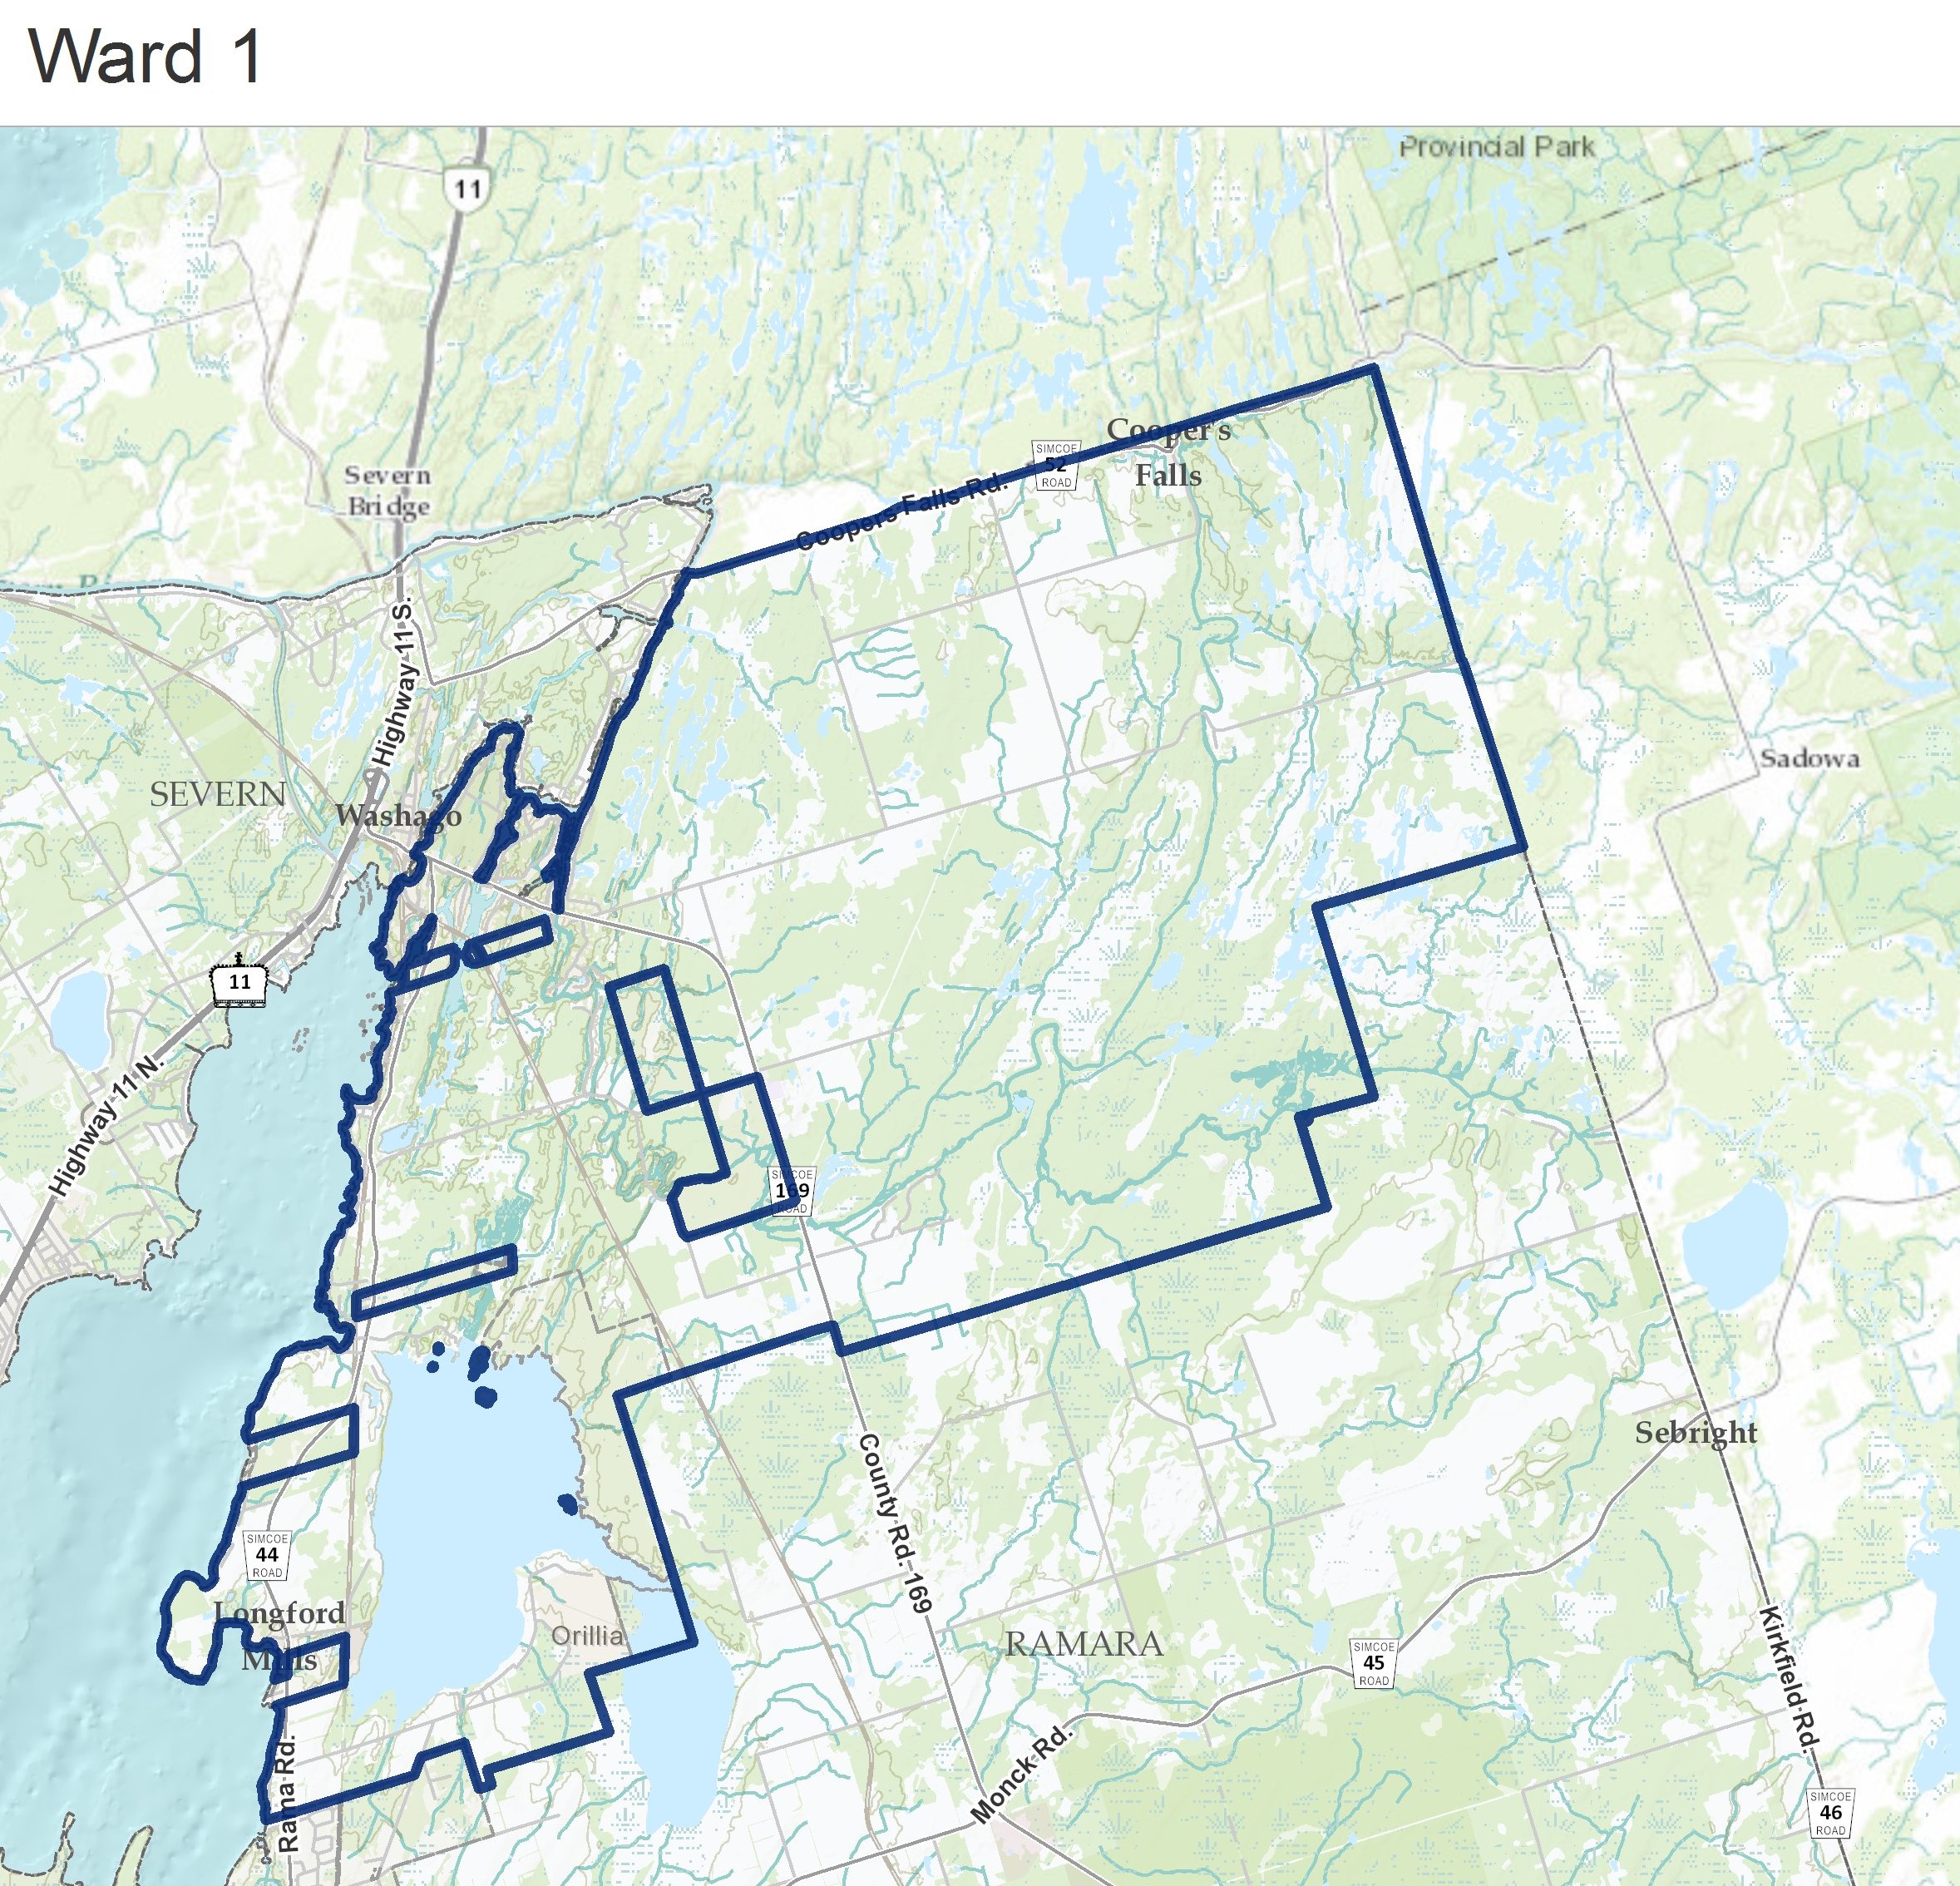 Map showing the area of Ward 1